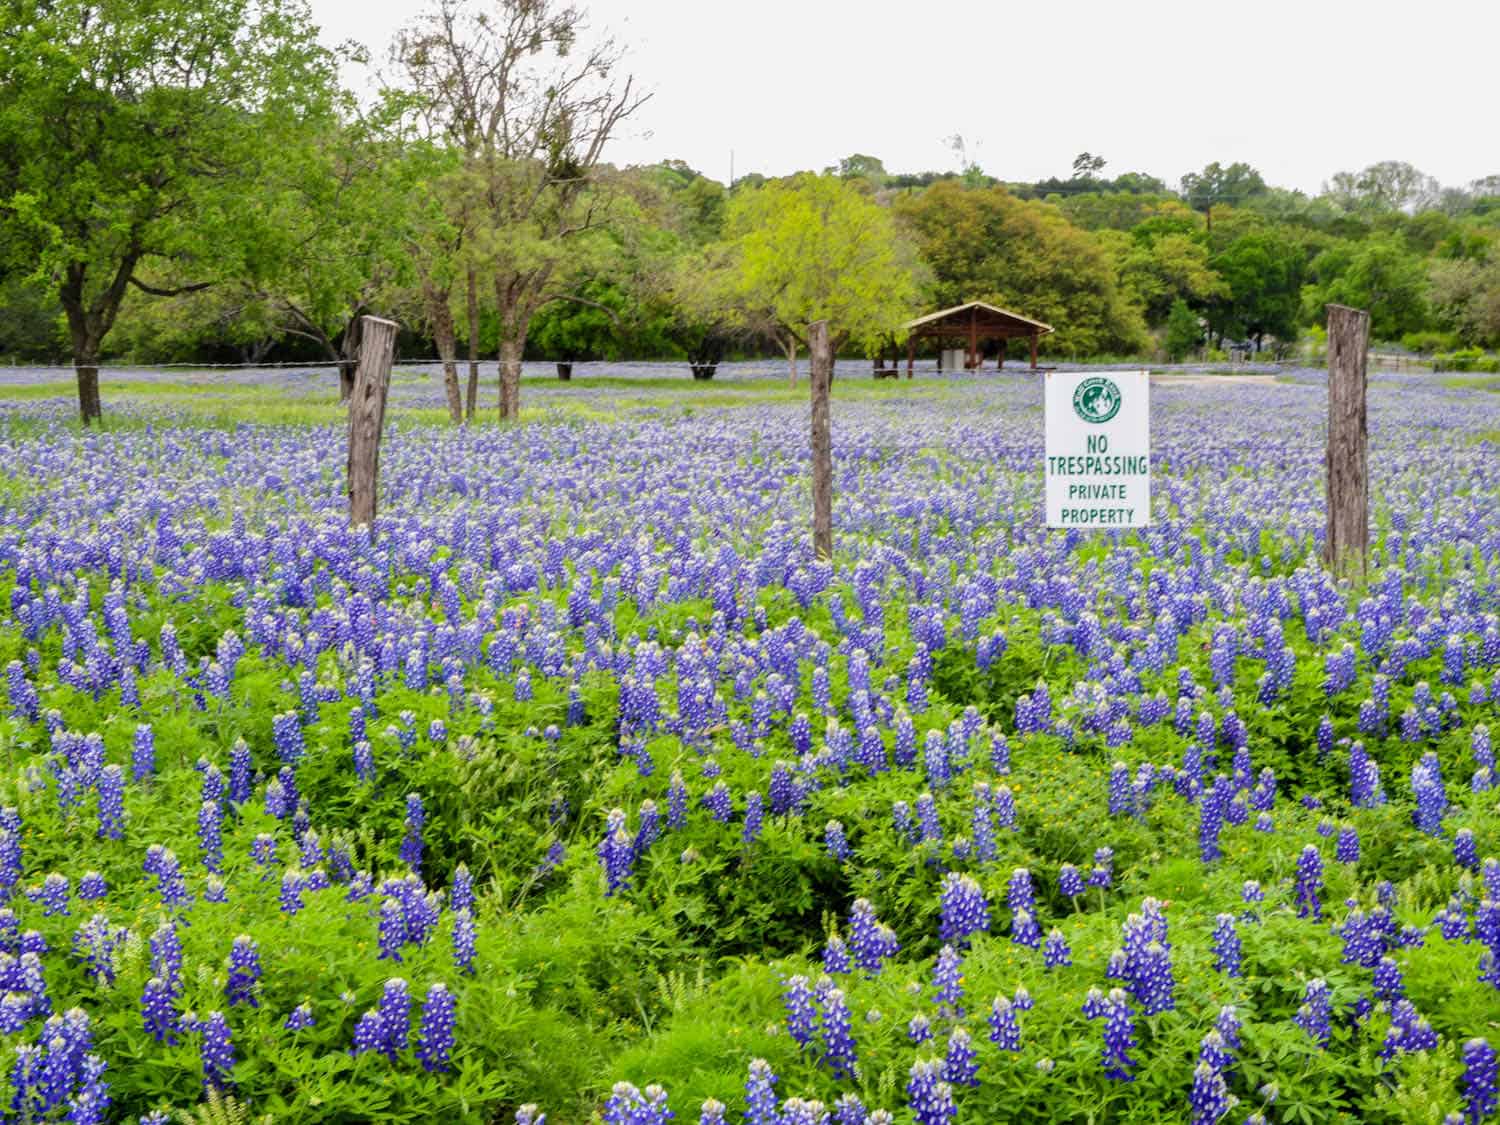 field of bluebonnets with a no trespassing sign on a fence as seen on a Texas Hill Country road trip.